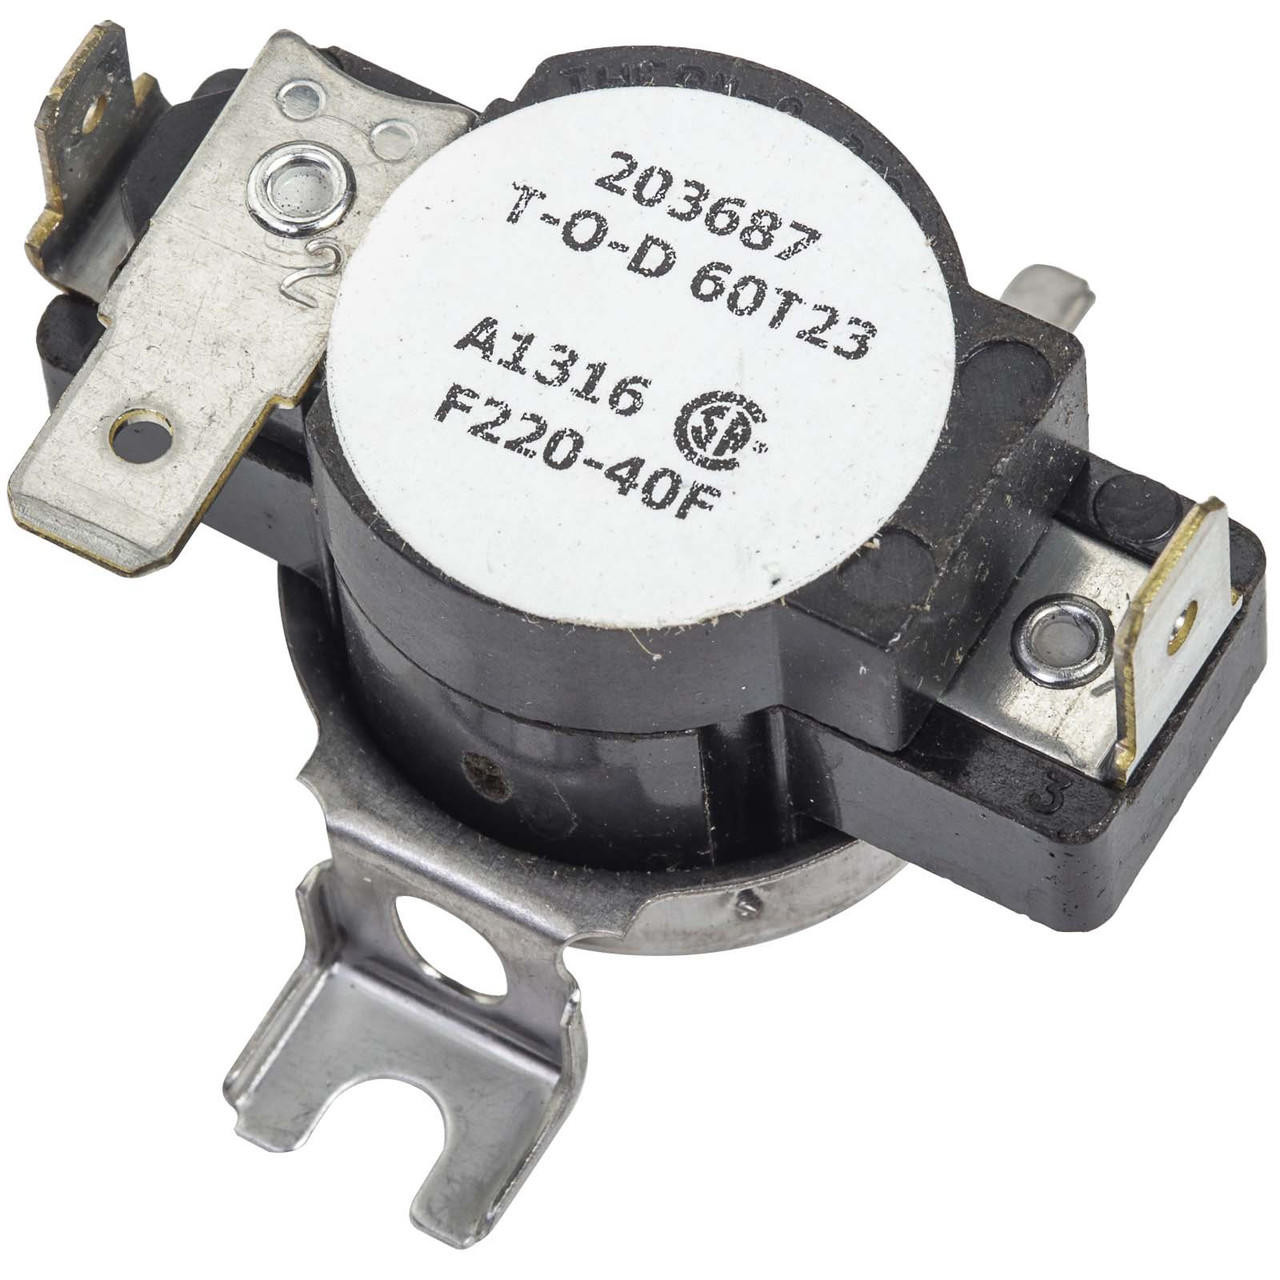 J11R00306-003 High Limit Switch, Extended Part Number 11J11R00306-003